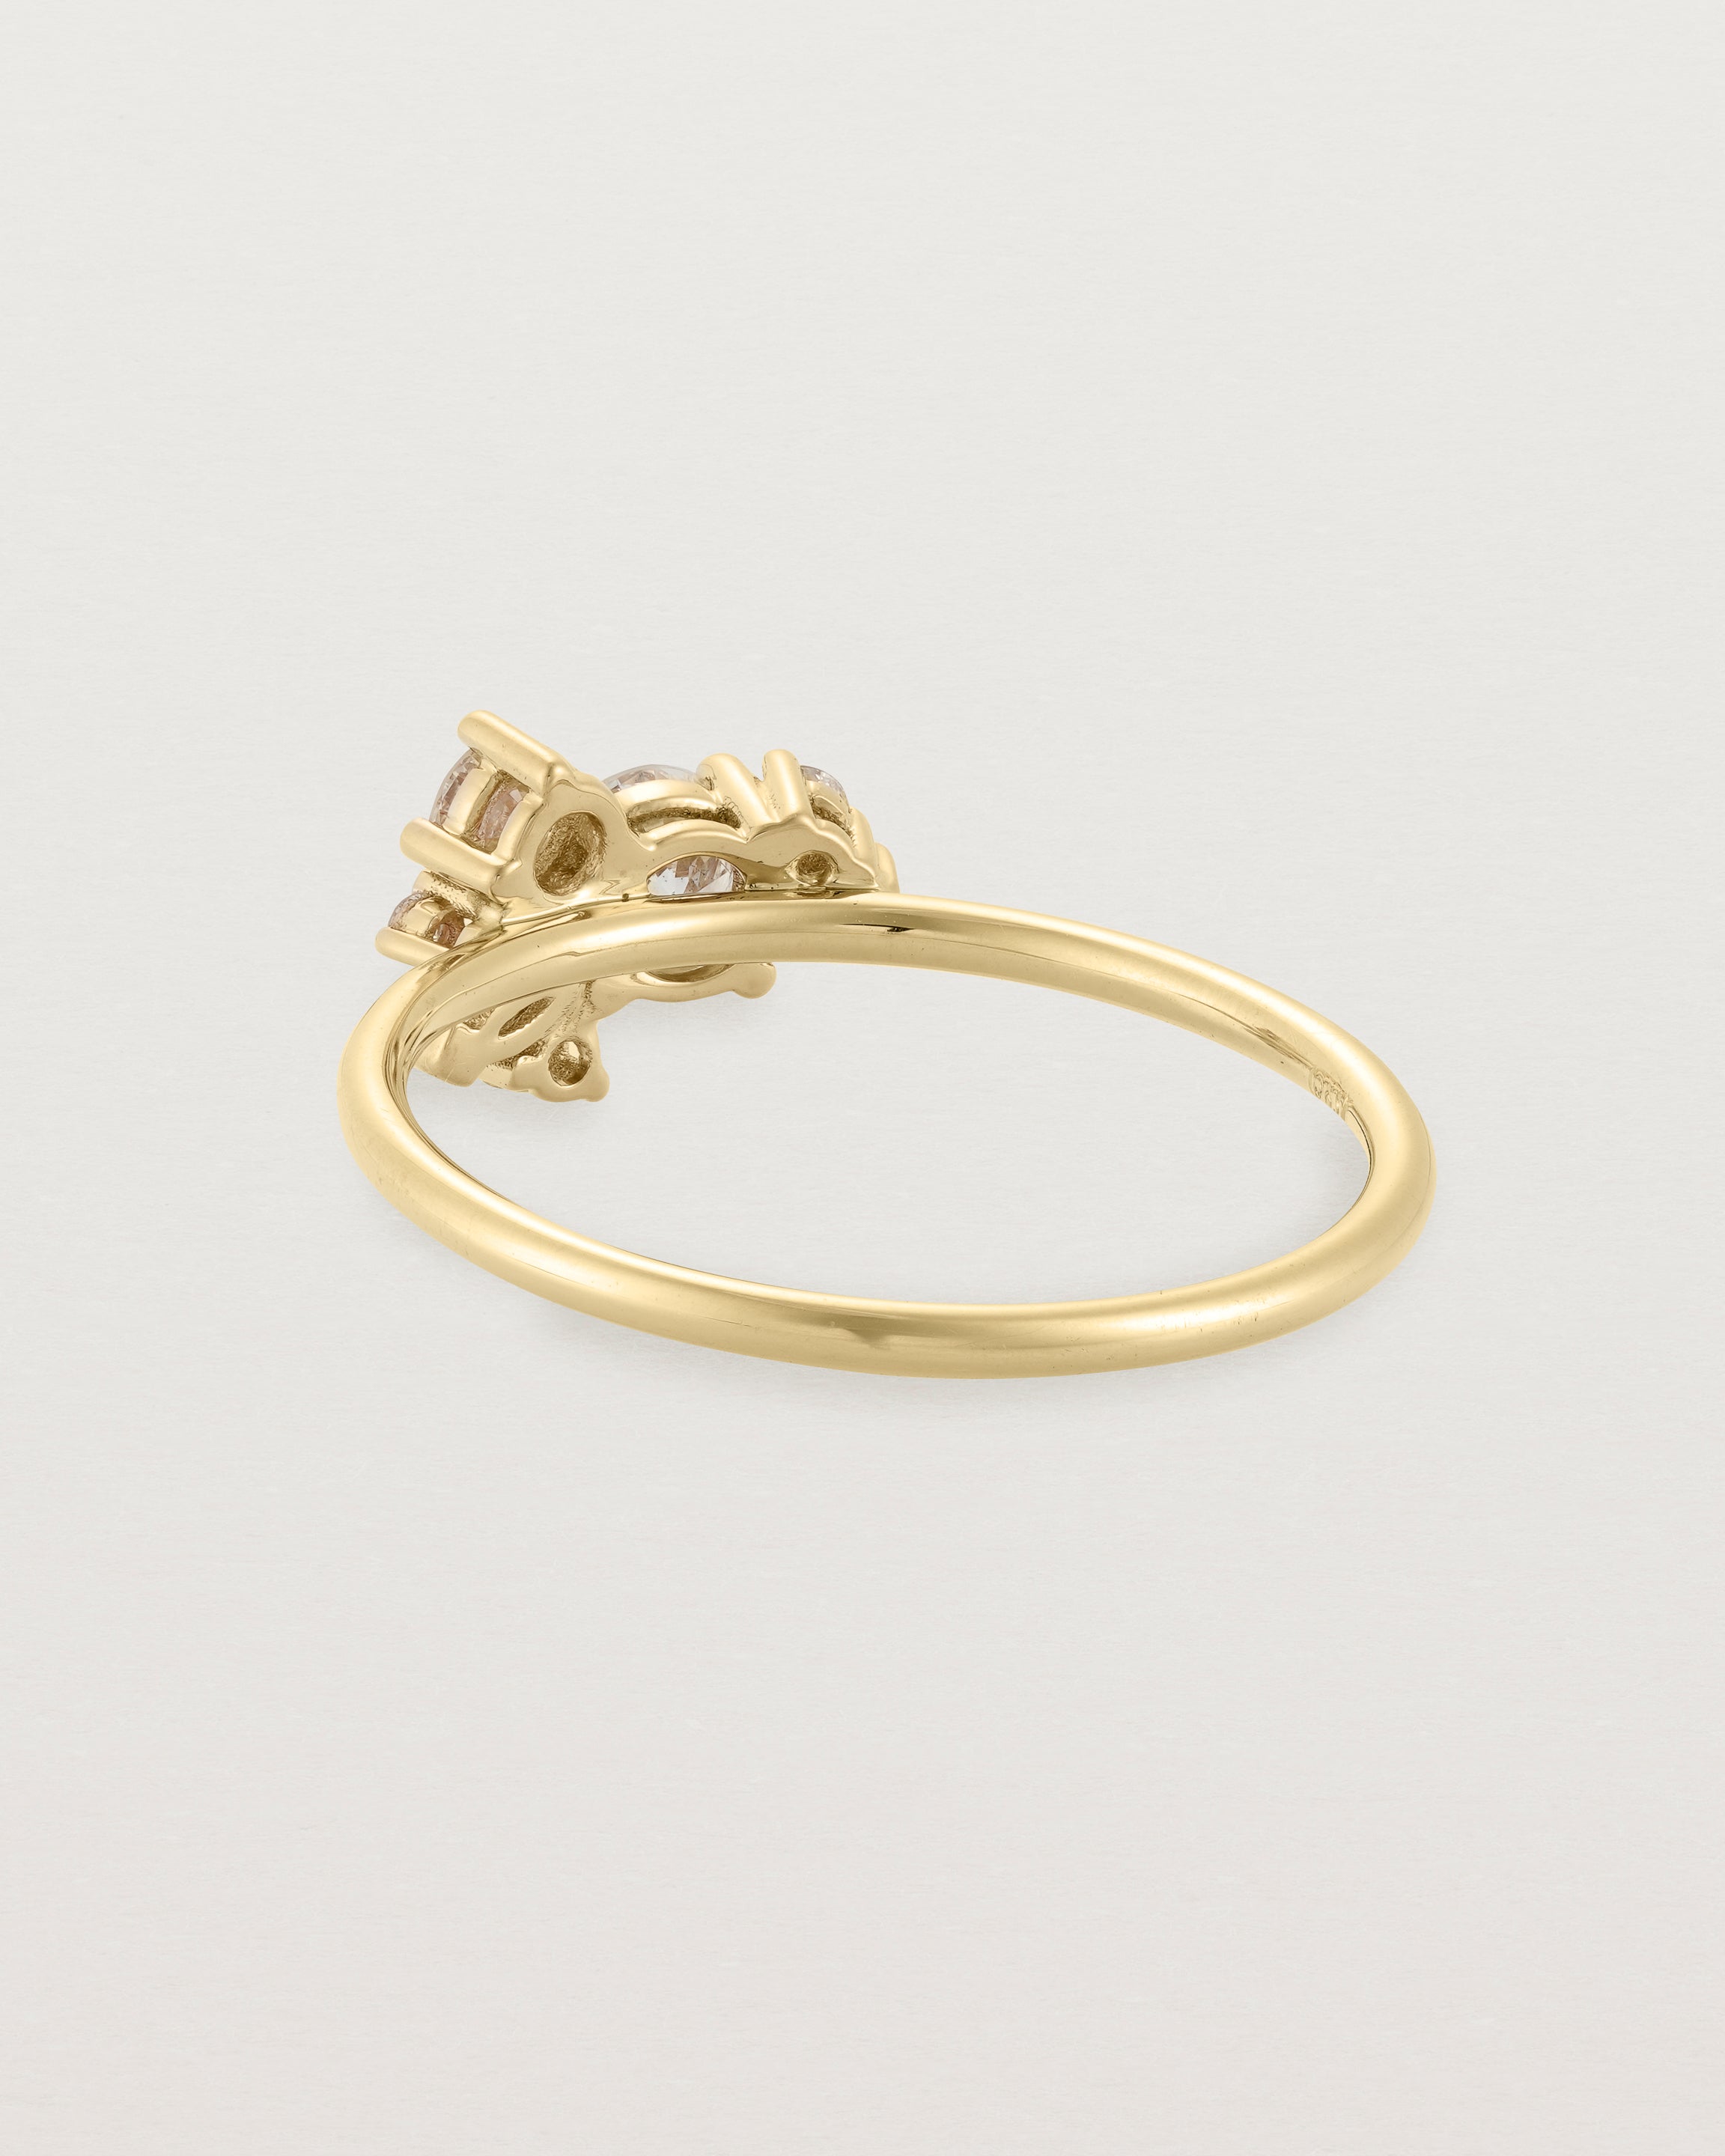 Back view of a white diamond cluster ring in yellow gold